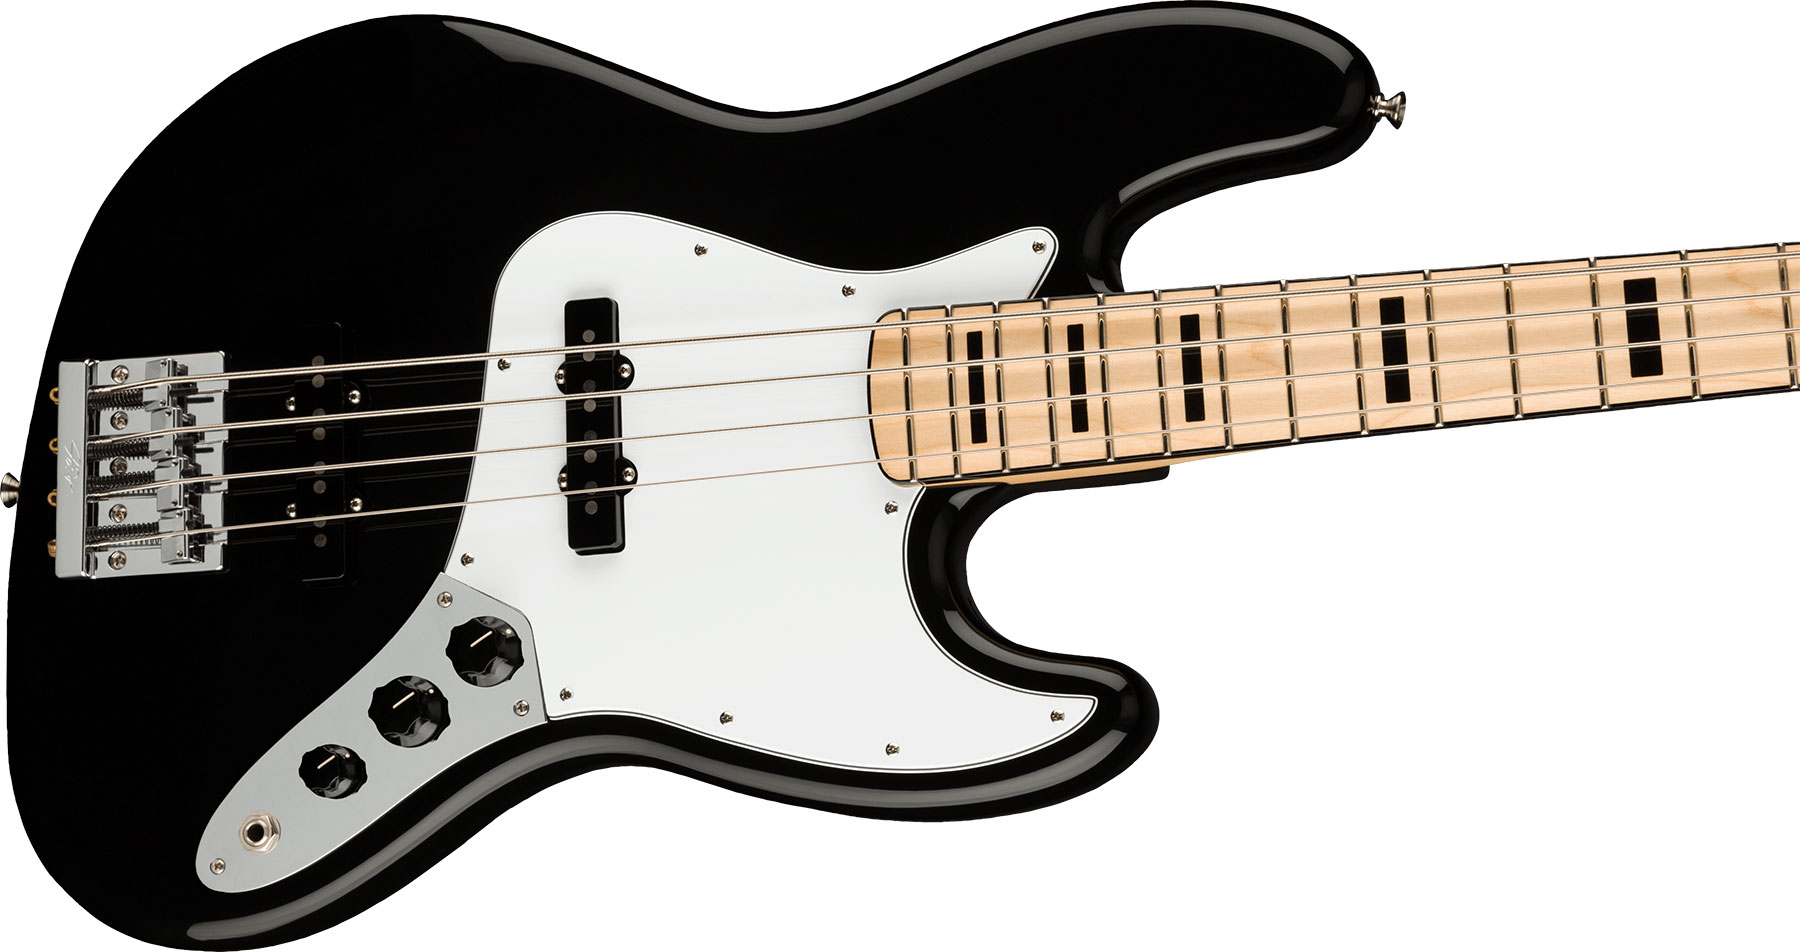 Fender Geddy Lee Jazz Bass Signature Mex Mn - Black - Solid body electric bass - Variation 2